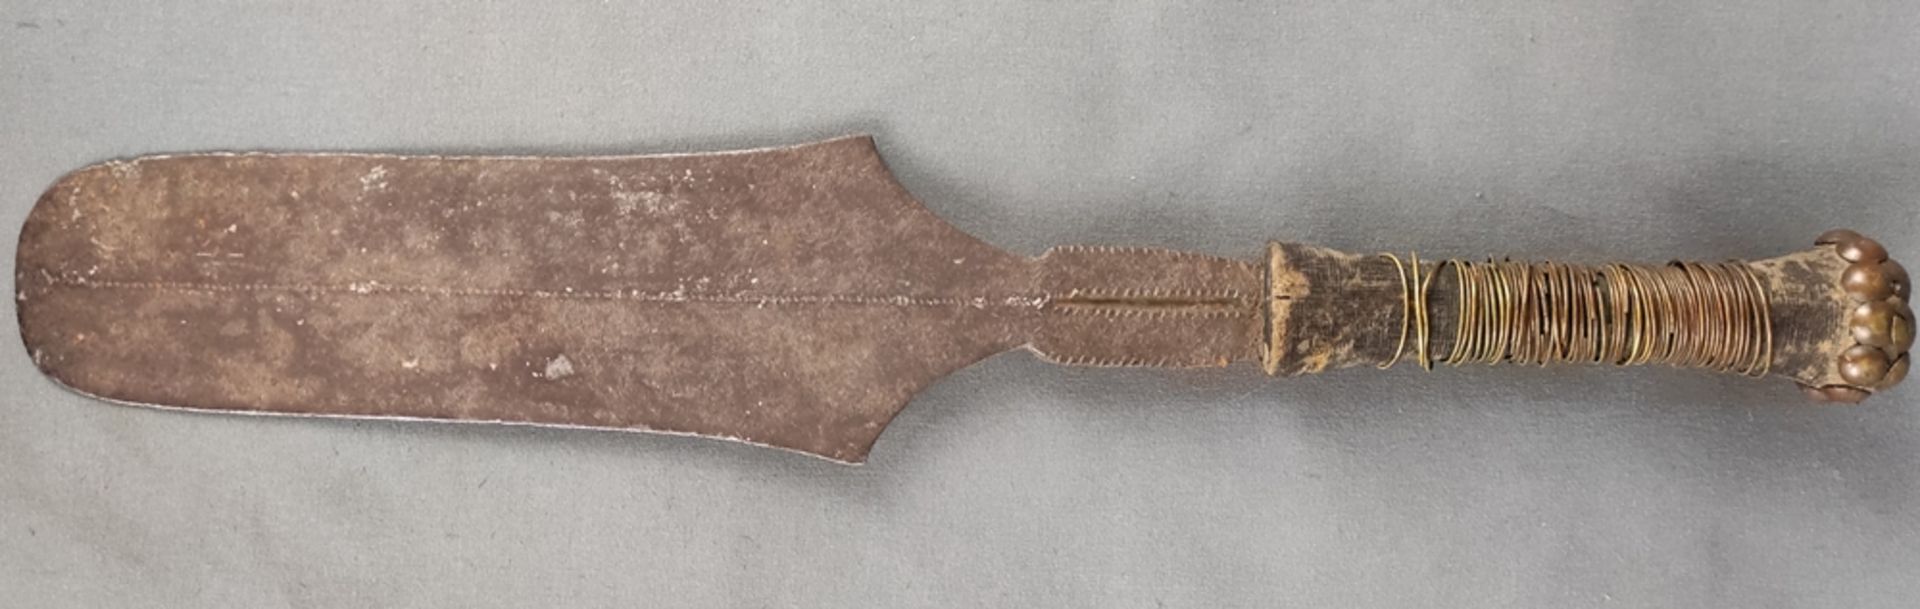 Ngombe dagger, straight, leaf-shaped, double-edged blade, at the grip blade starts oval, tapers,